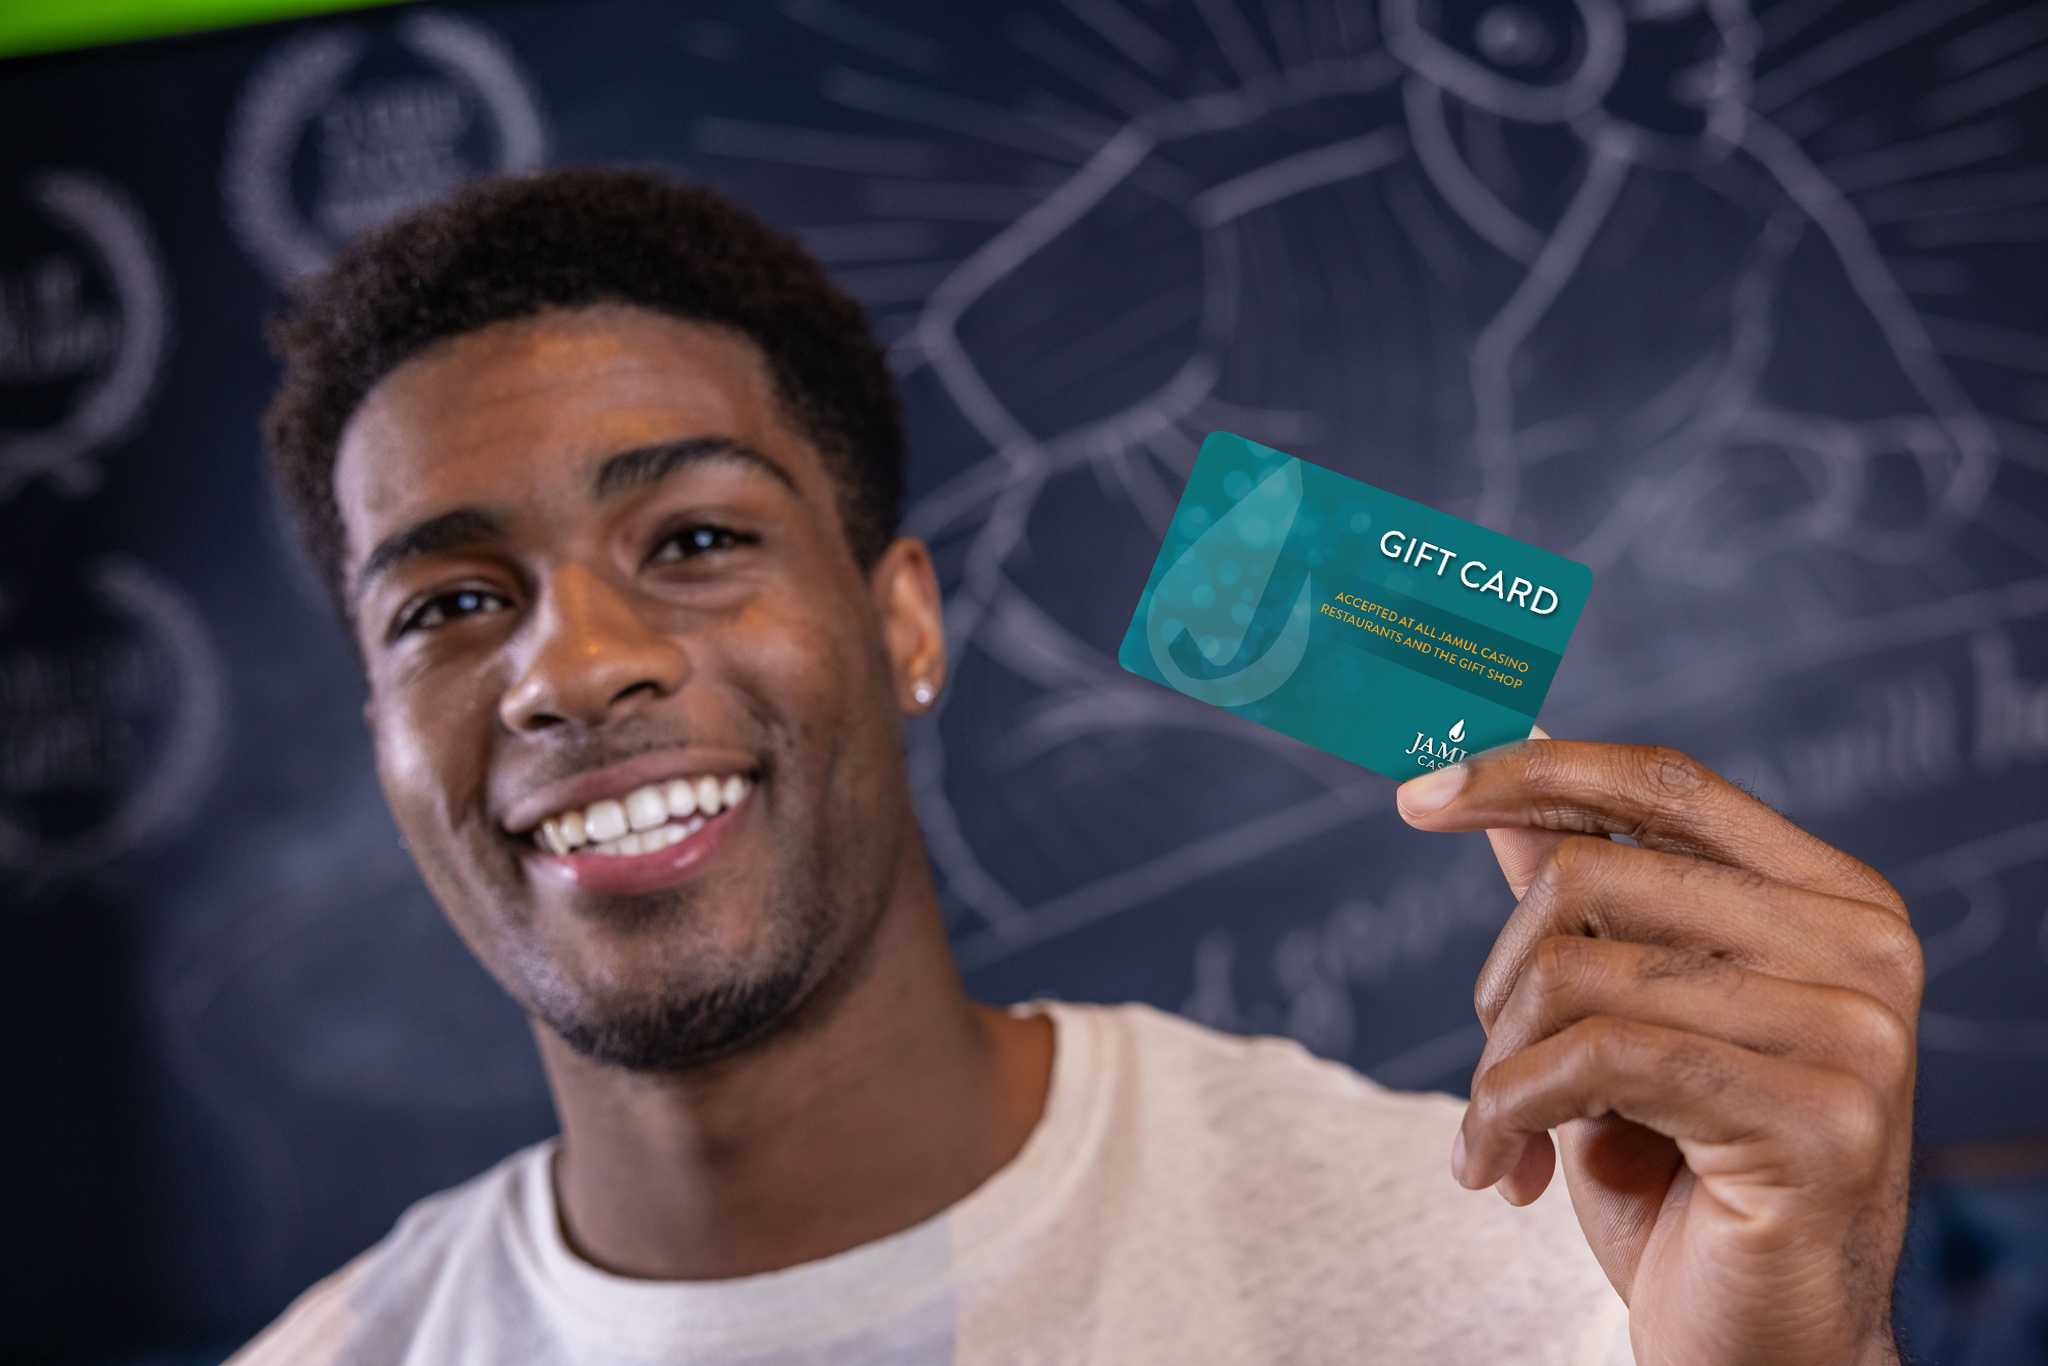 A young man smiling and holding up the Jamul Casino gift card.